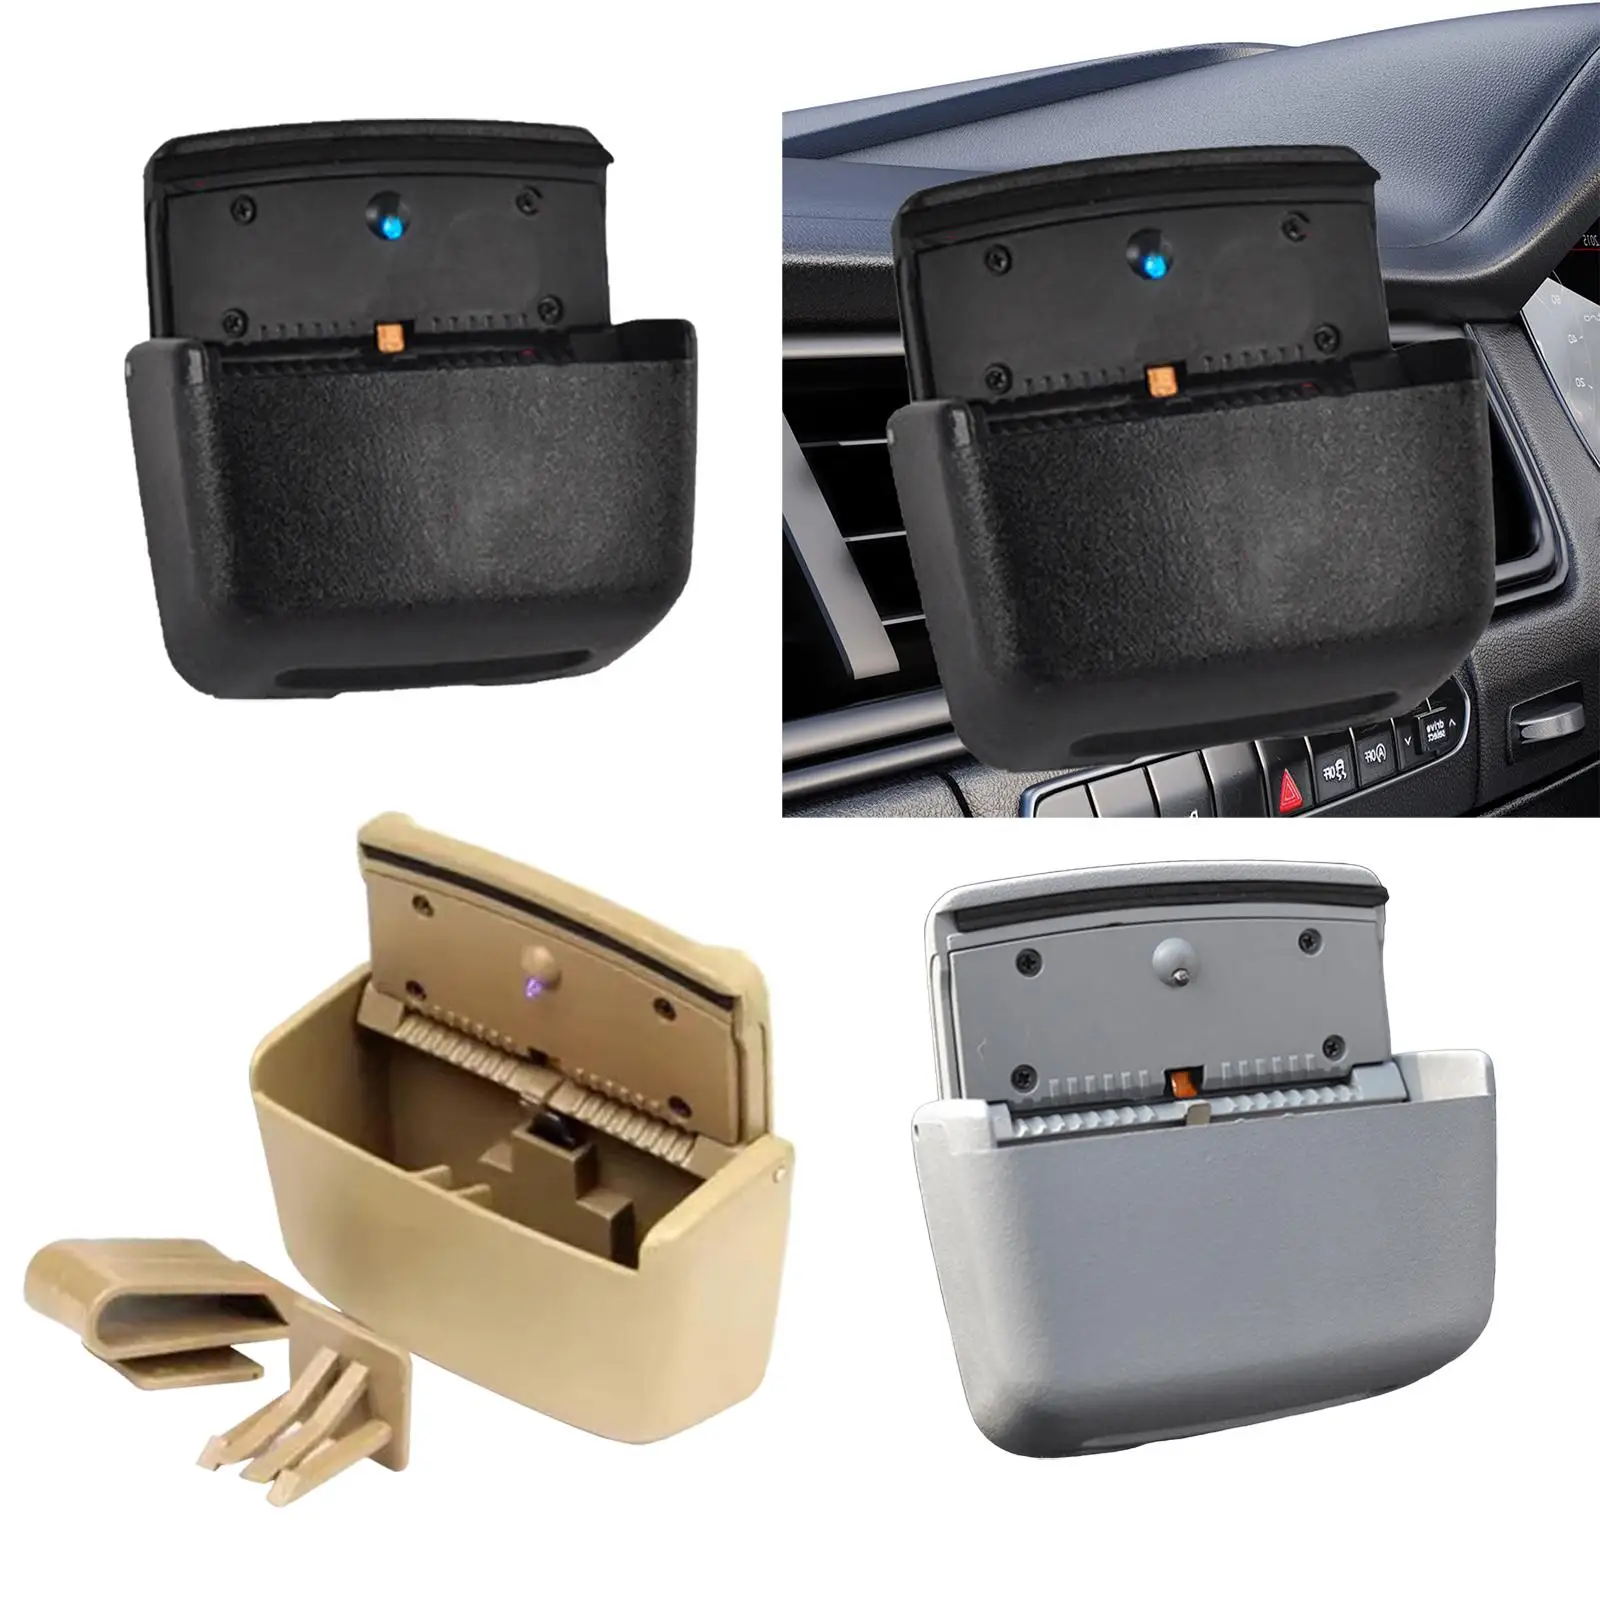 Portable for Car Detachable with LED Light for Cars for Home Office